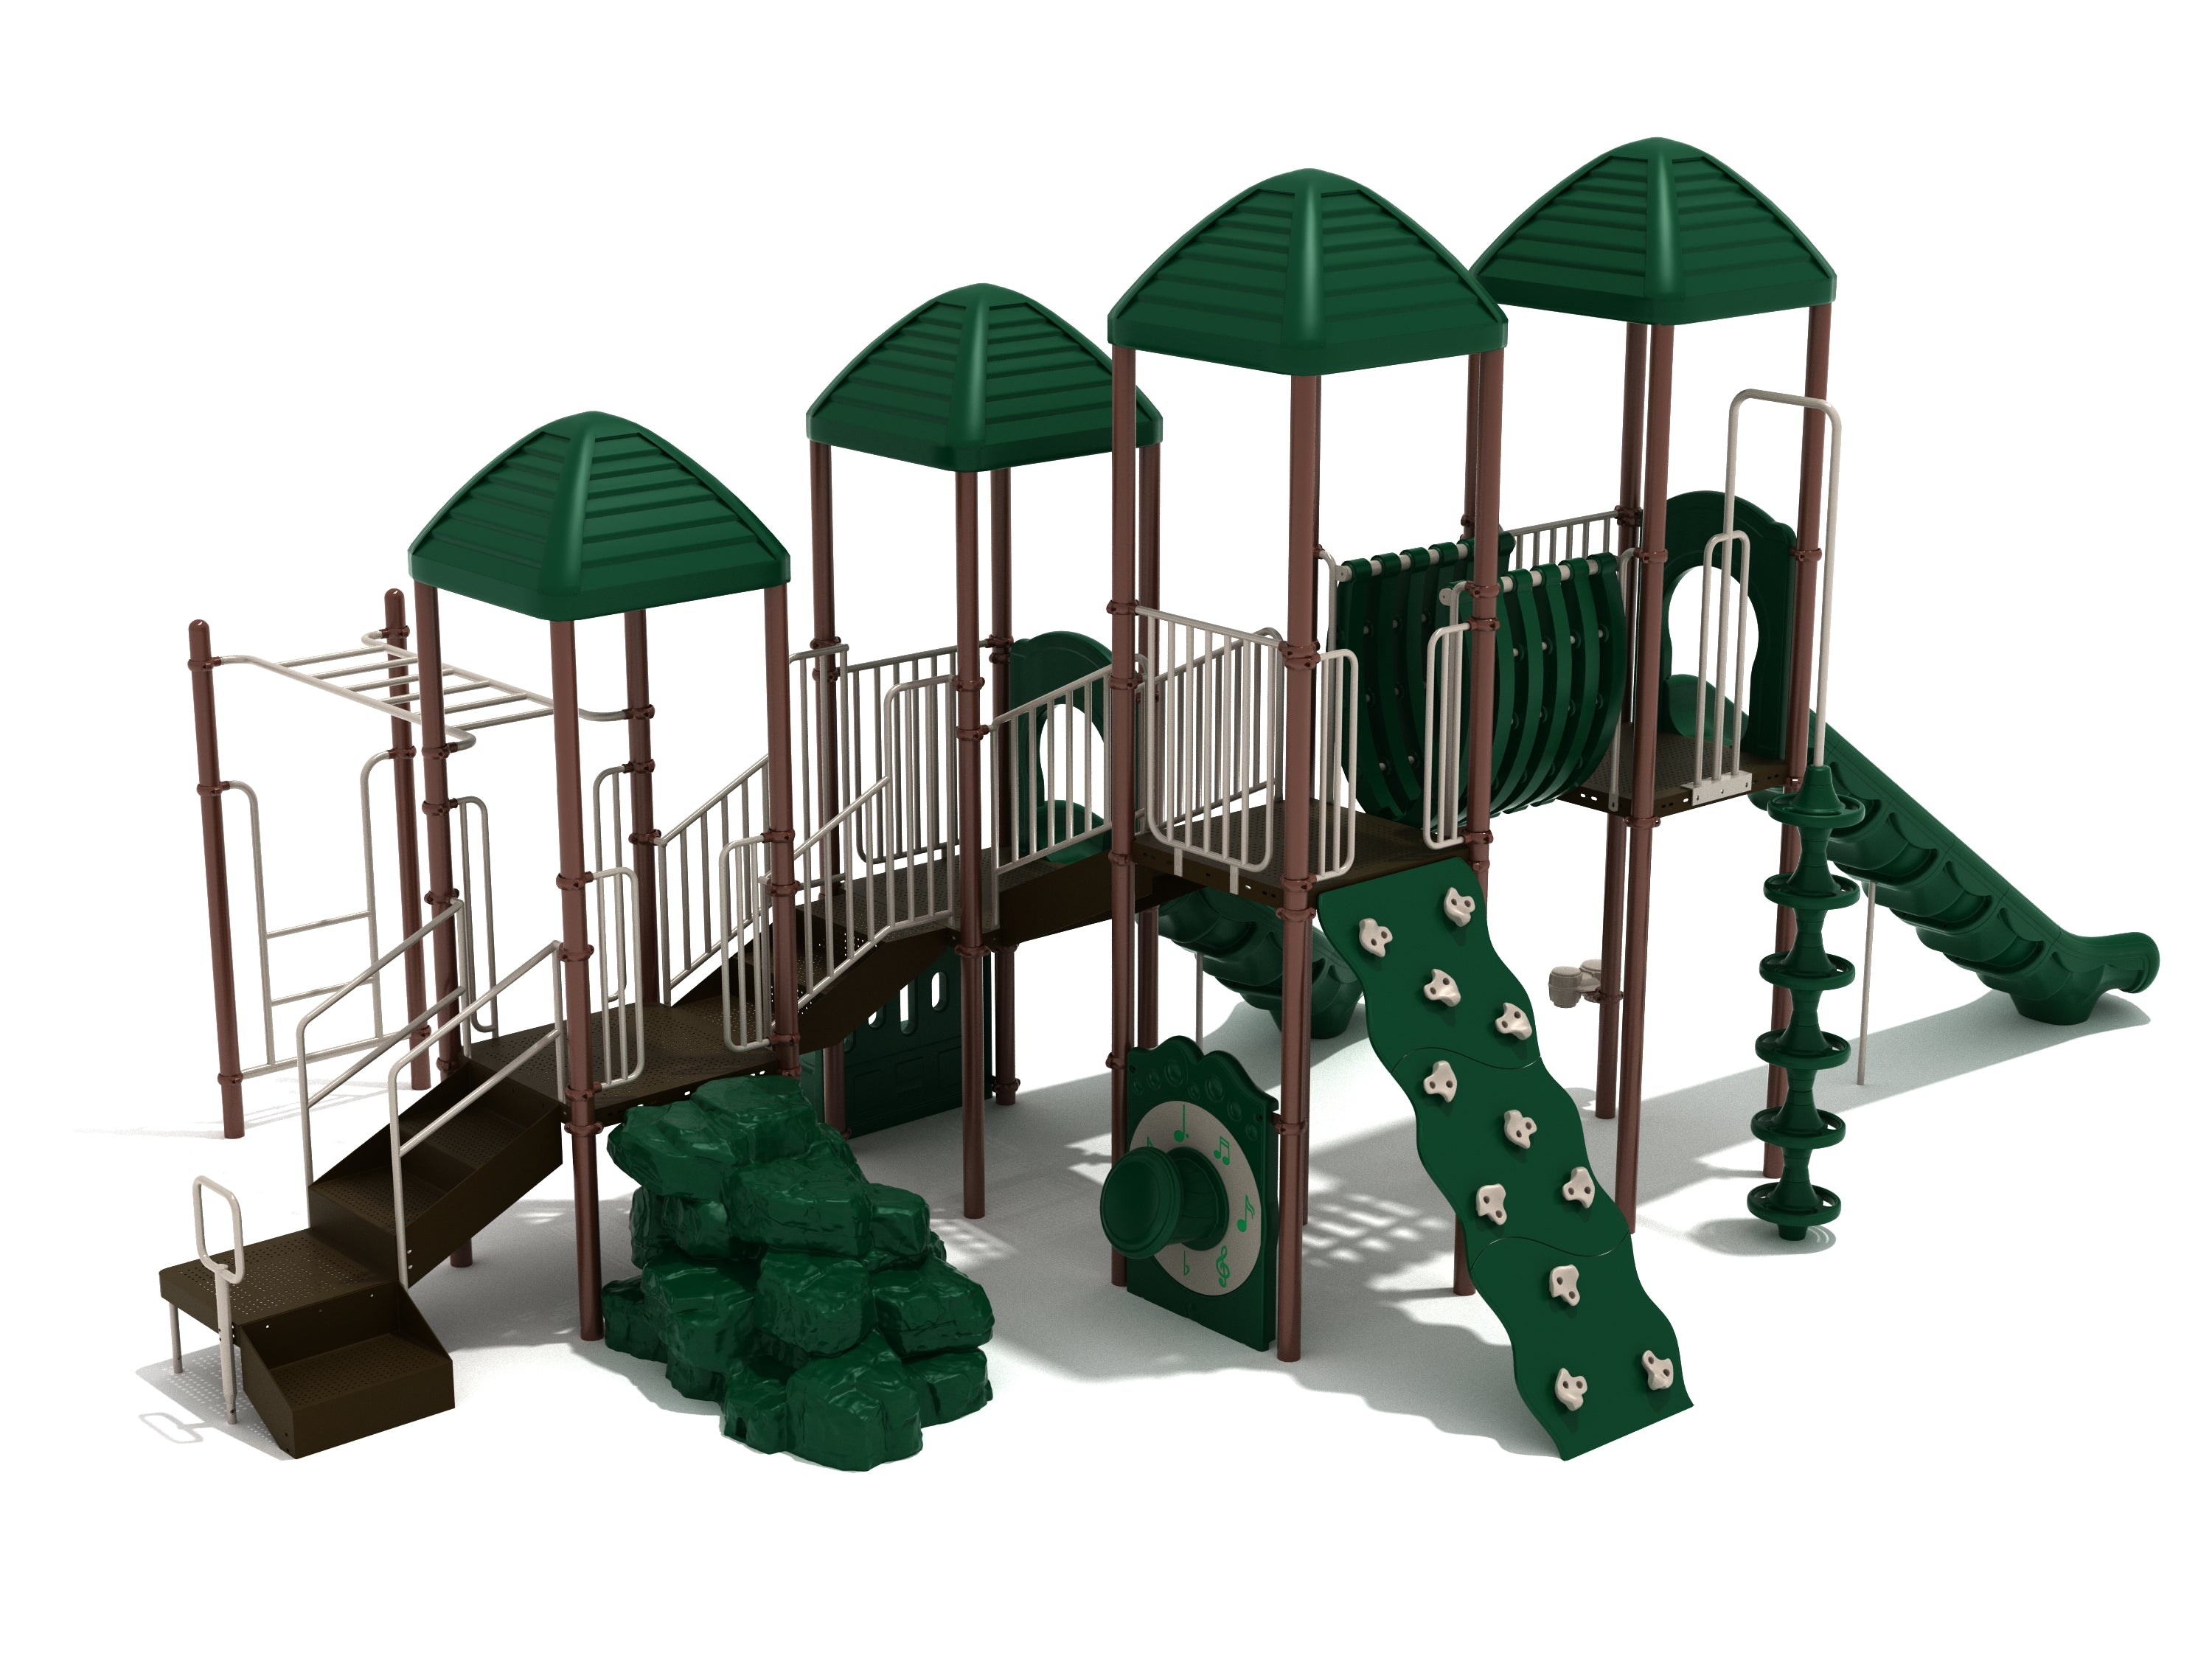 Greenville Playground Neutral Colors